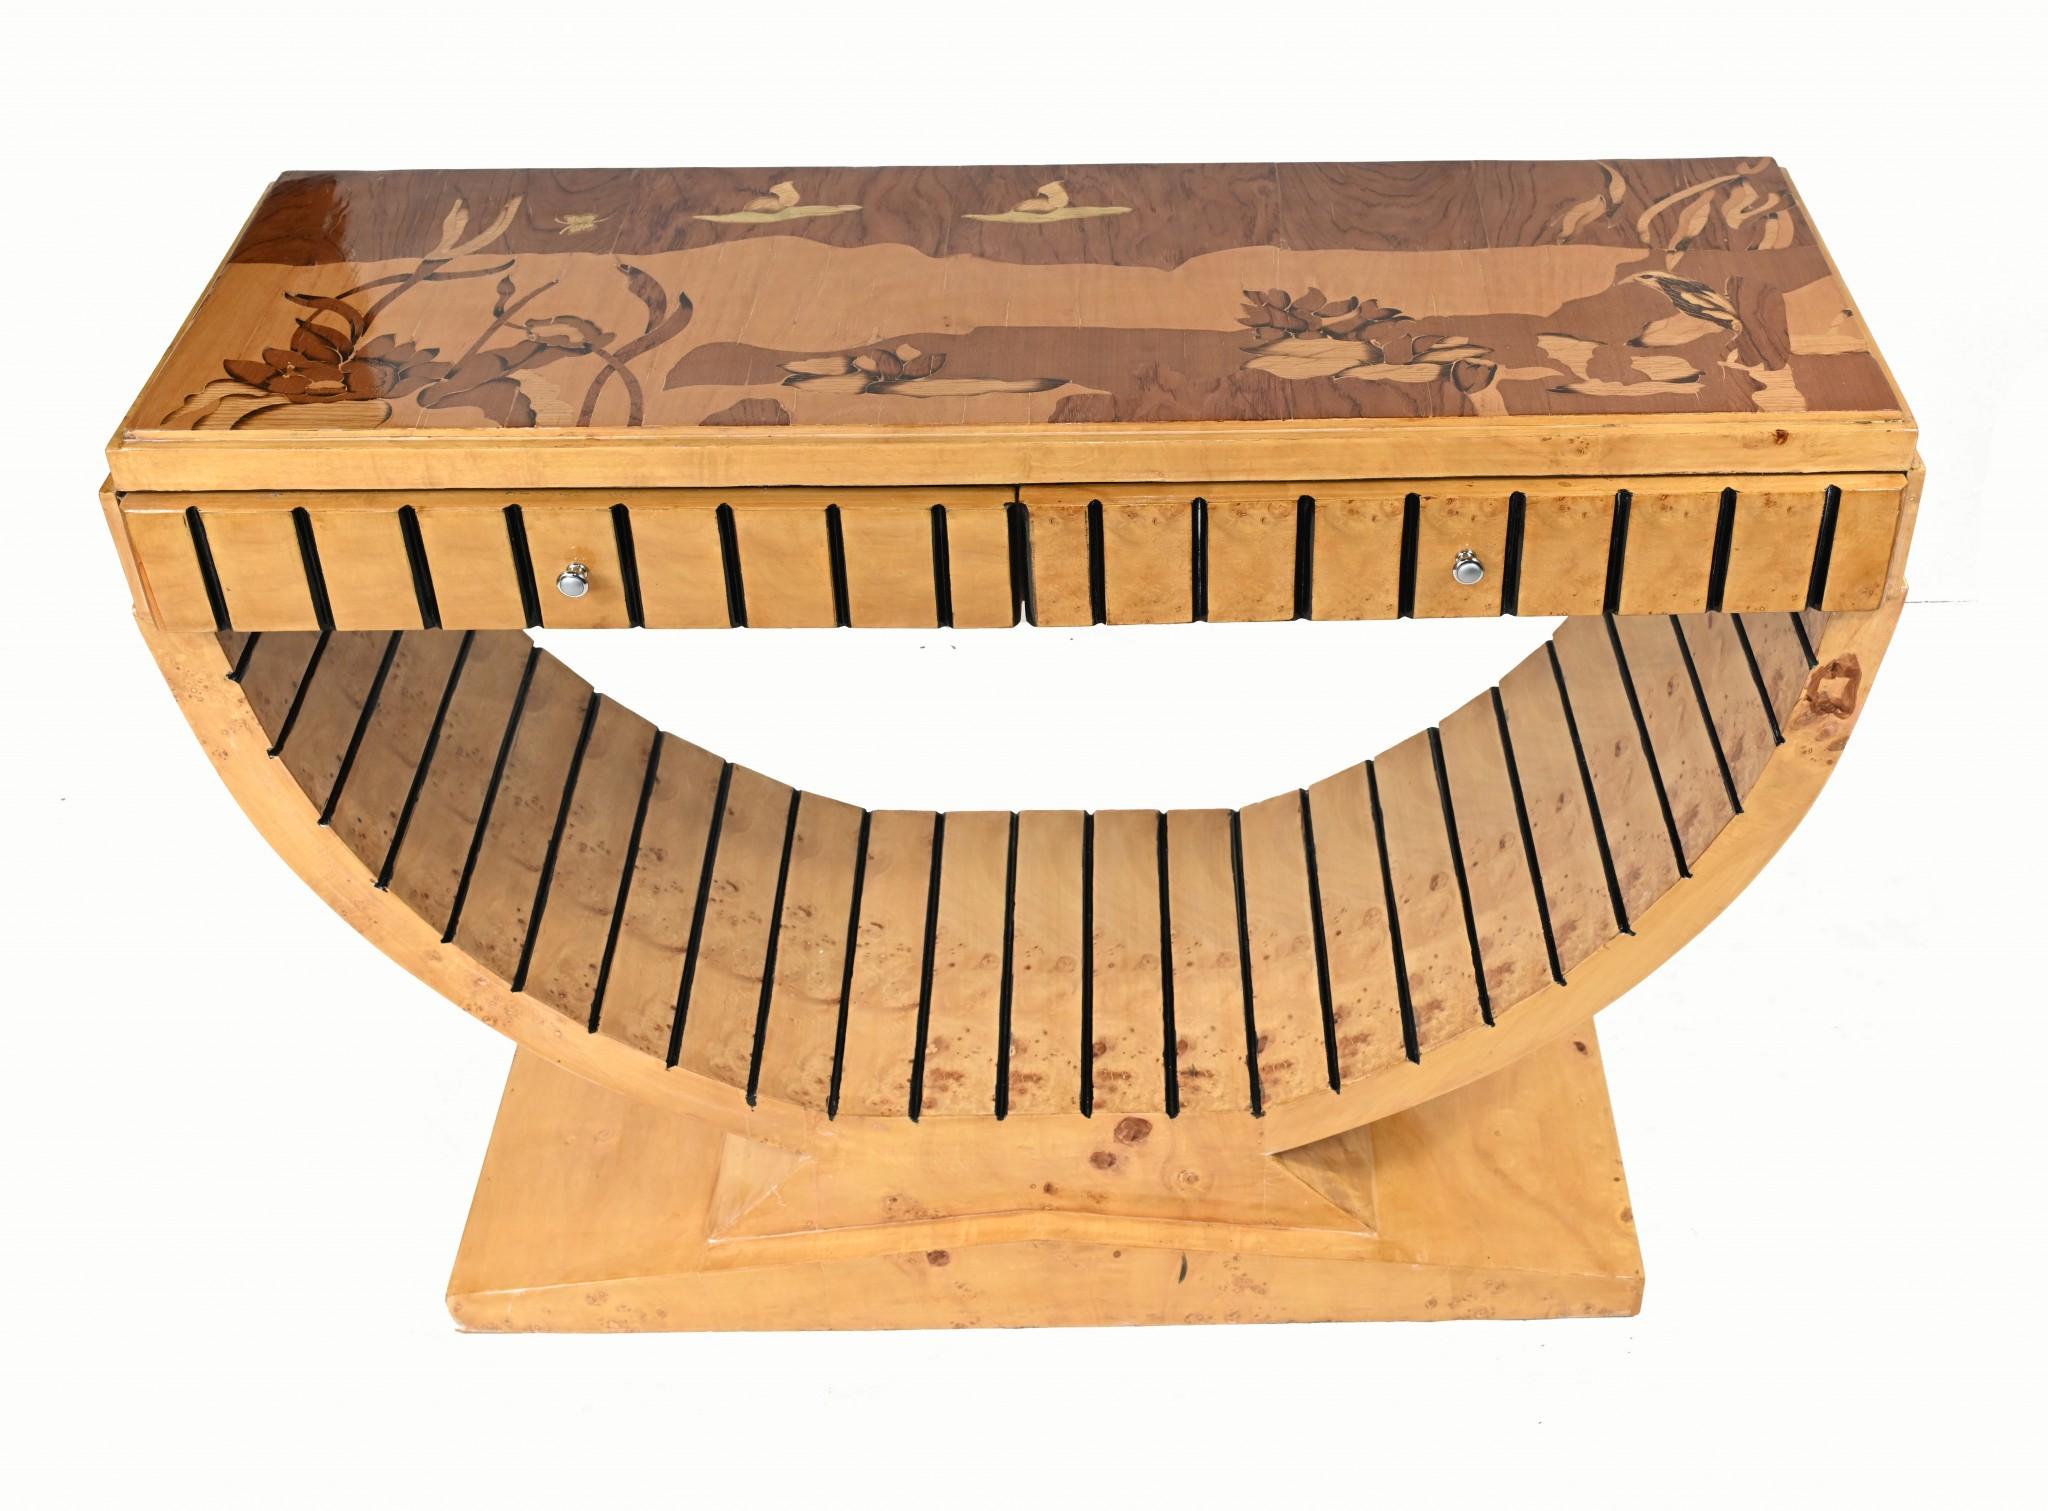 Handsome console table in the Art Deco style
Features intricate marquetry inlay to the top showing flowers and birds, please see close up photos
Great looking table with distinctive clean and minimal deco design
Very distinctive look, very